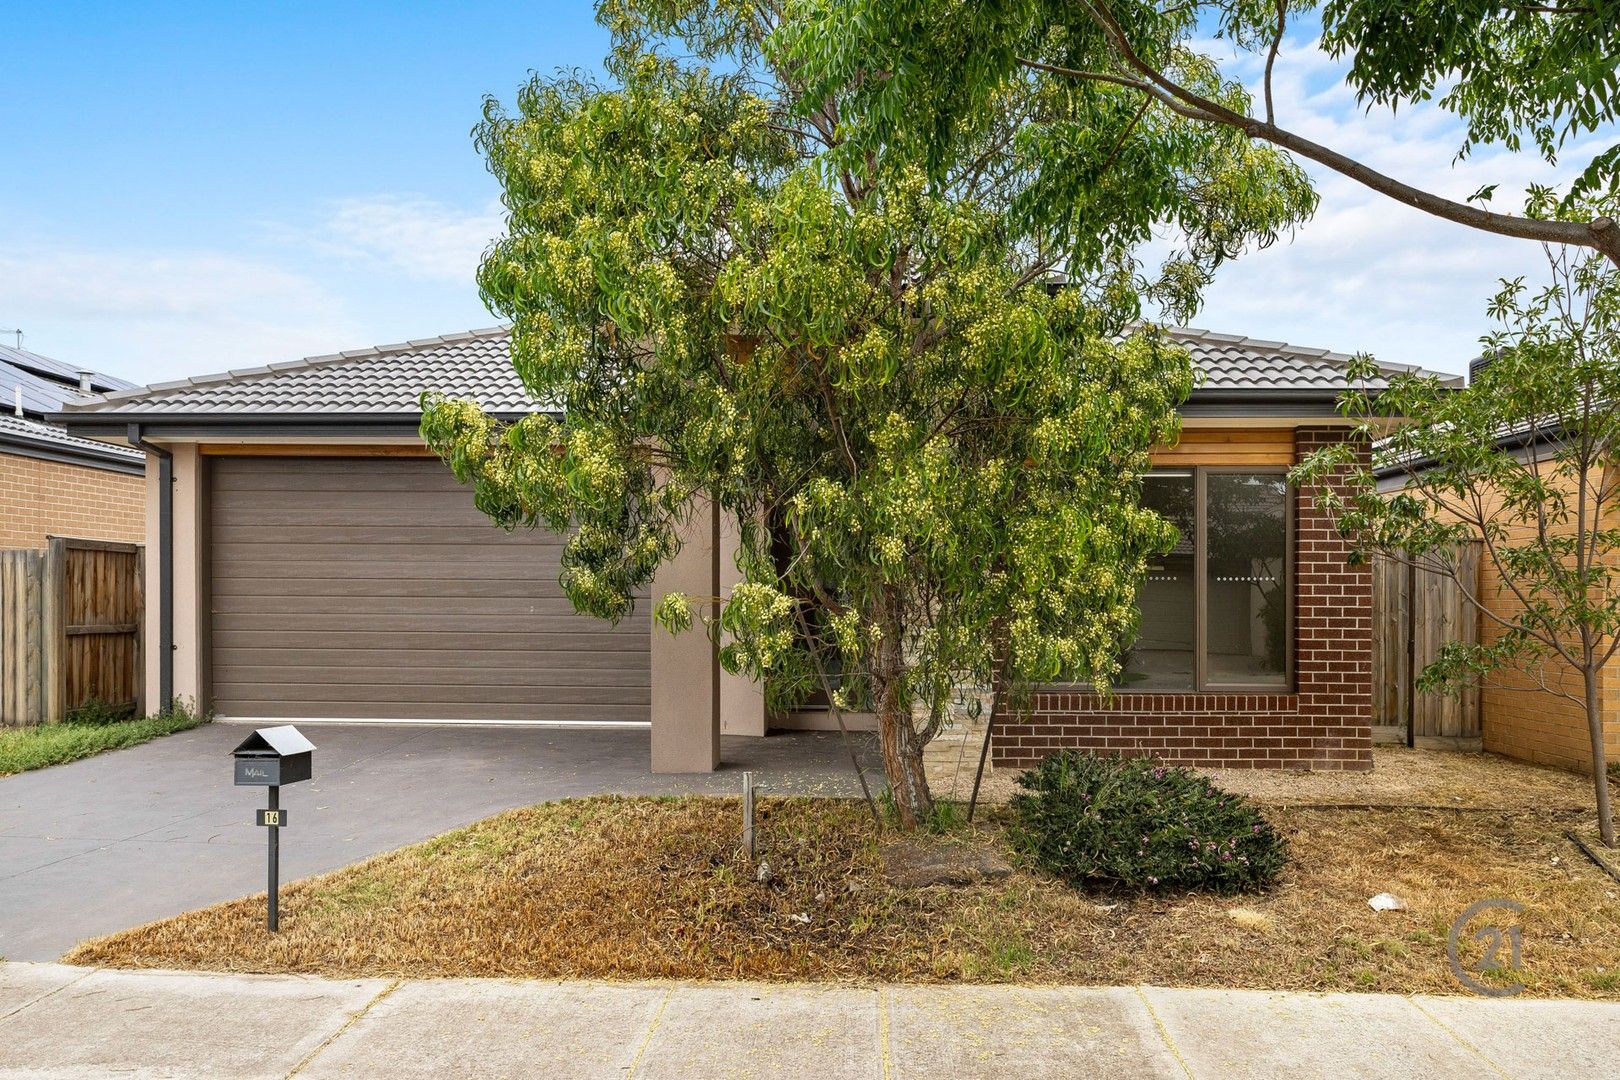 4 bedrooms House in 16 Chamberlain Way WILLIAMS LANDING VIC, 3027